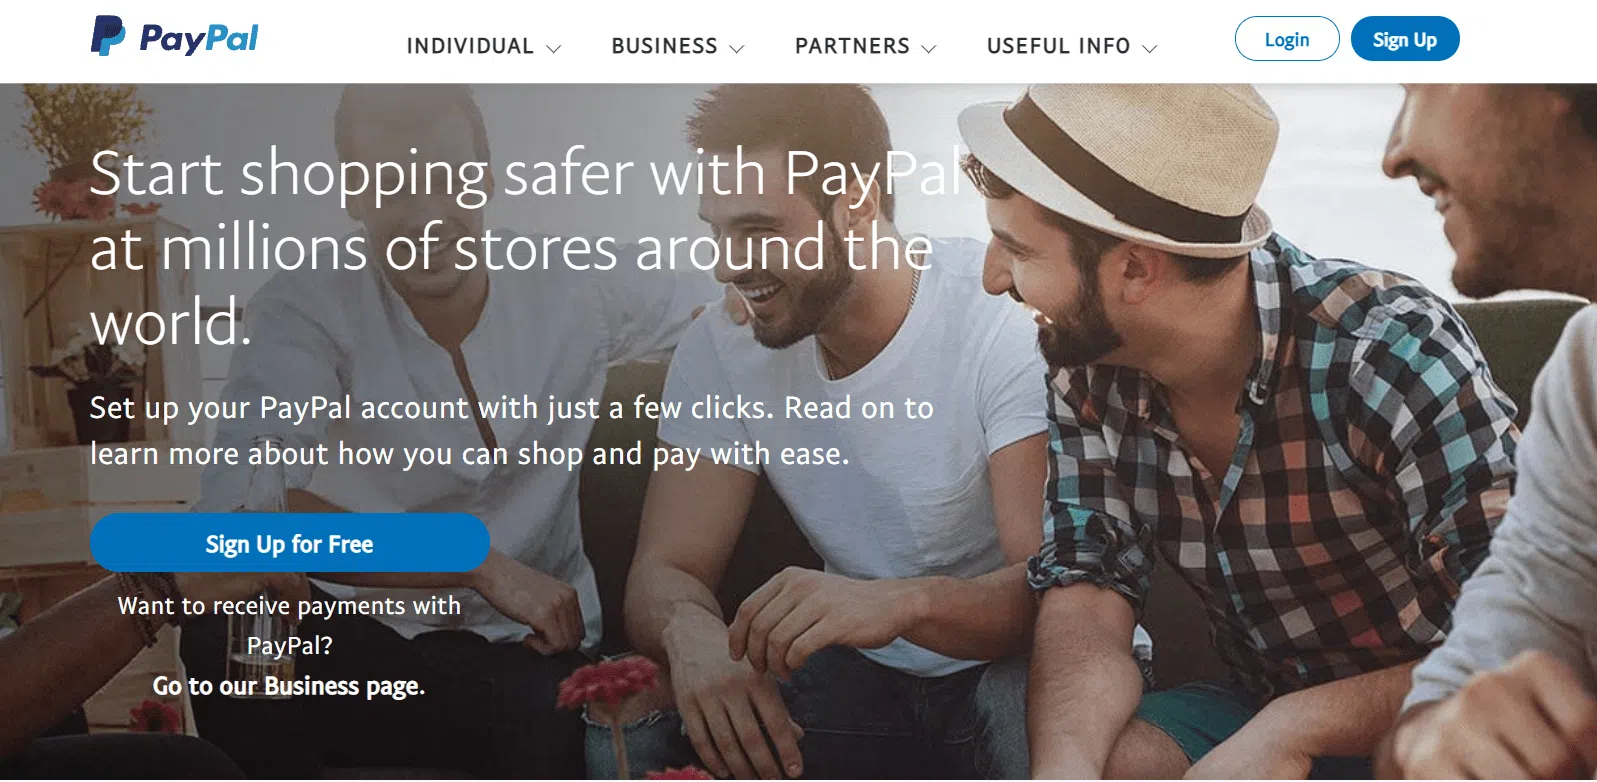 How To Open A PayPal Account In India And Verify It: signup